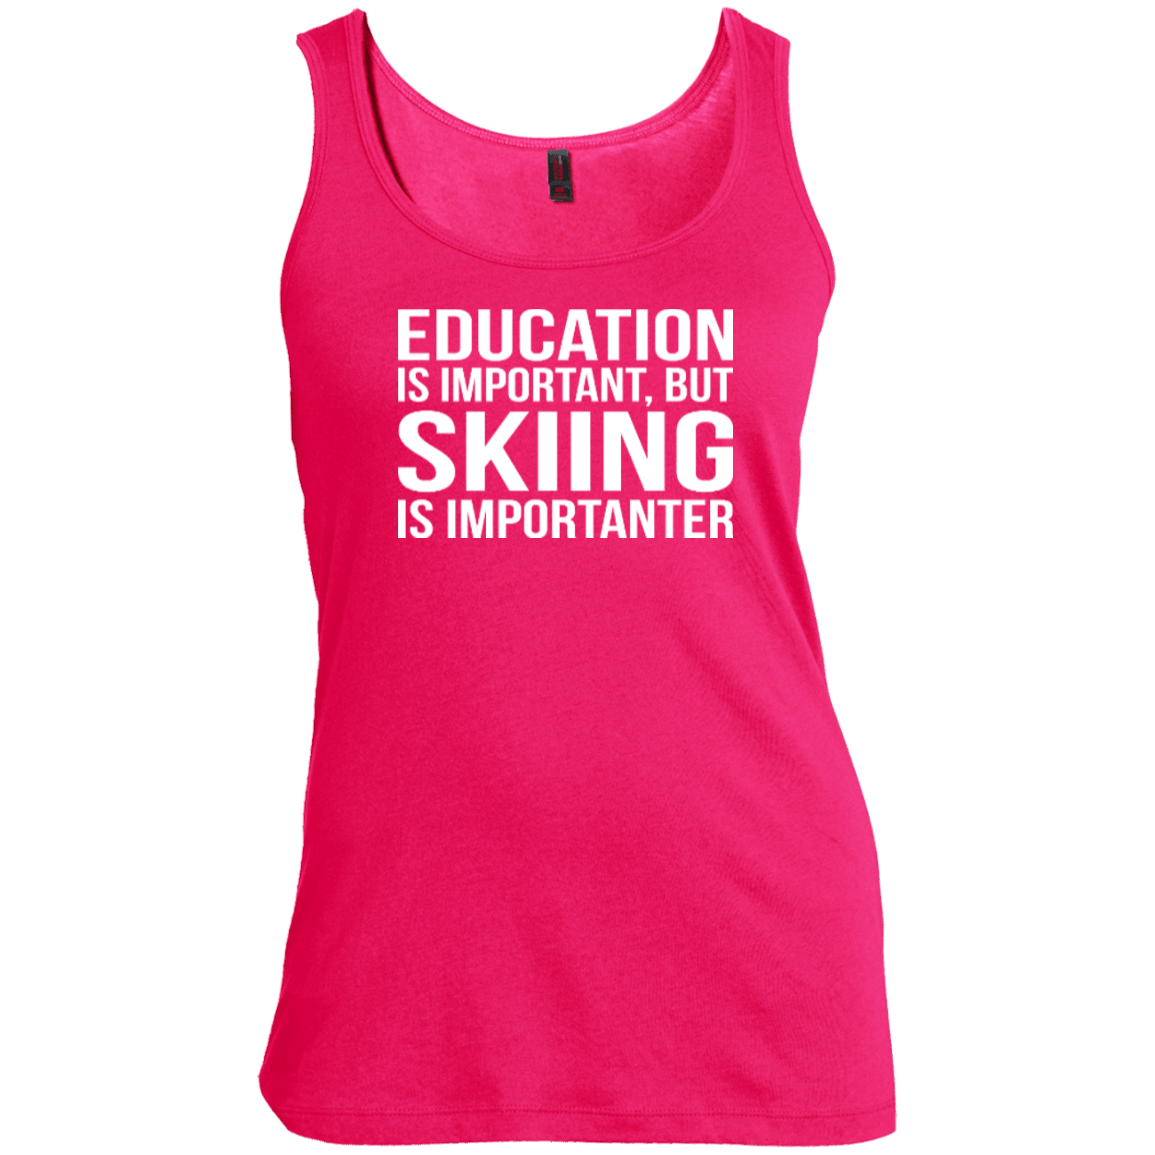 Education Is Important But Skiing Is Importanter Tank Tops - Powderaddicts